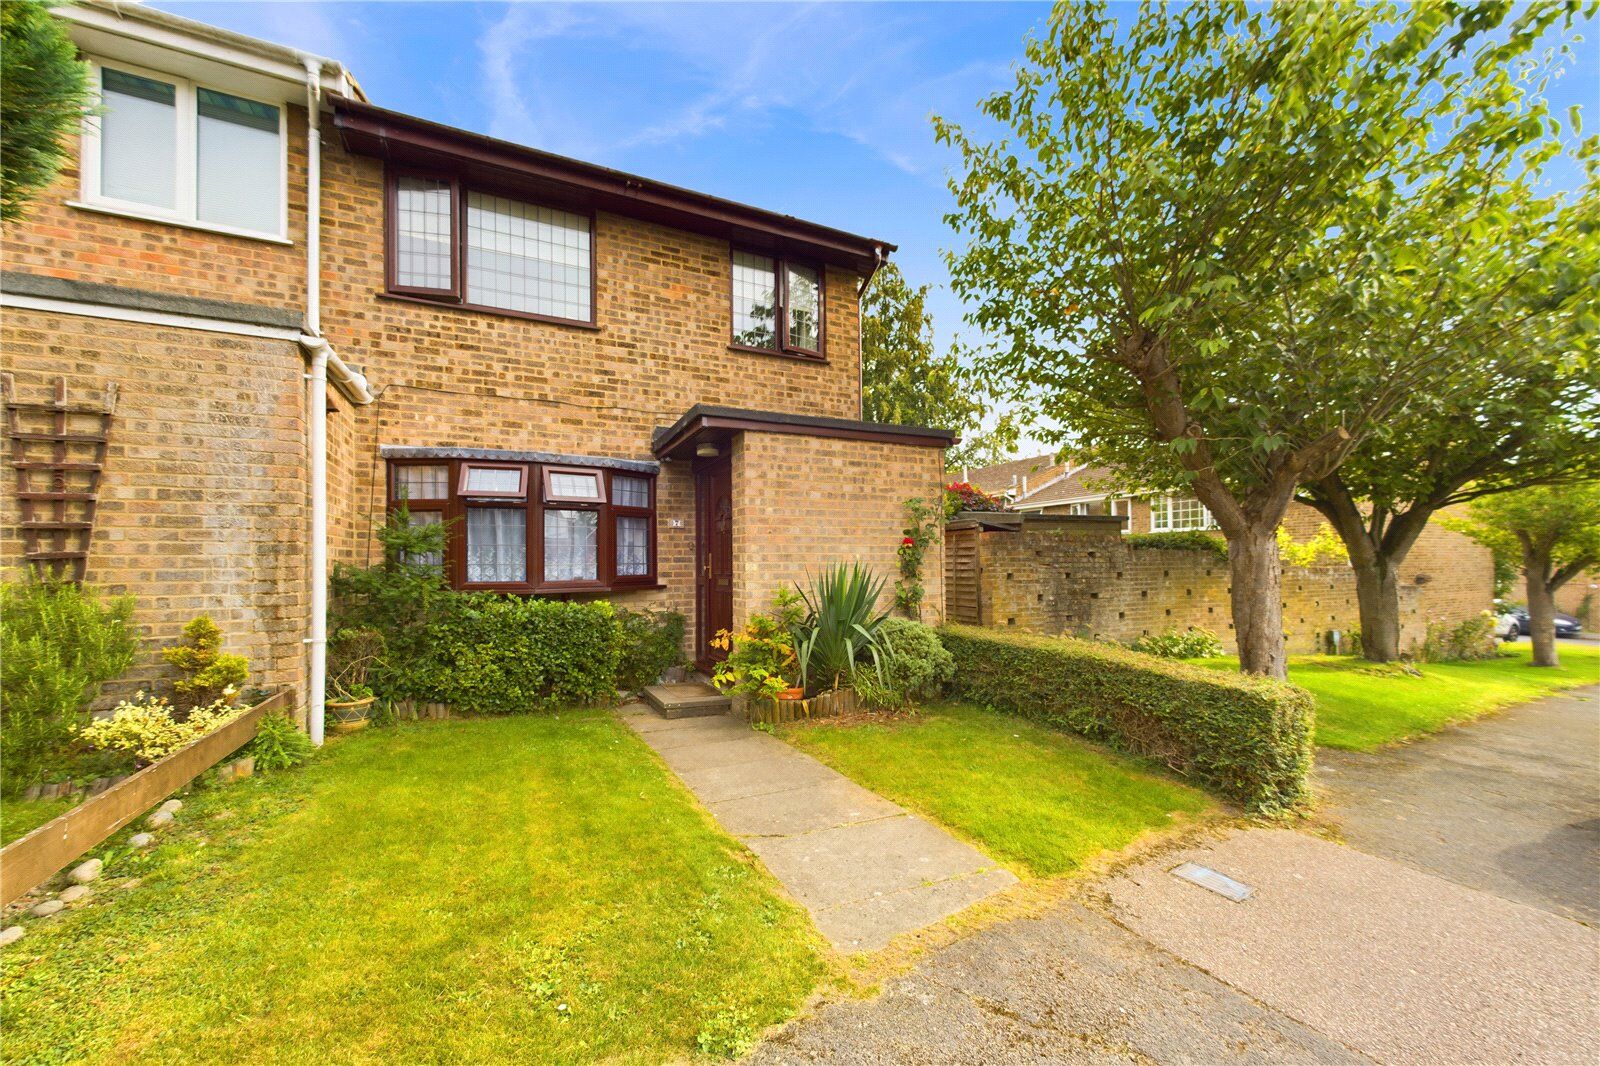 3 bedroom end terraced house for sale Shaftesbury Way, Royston, SG8, main image